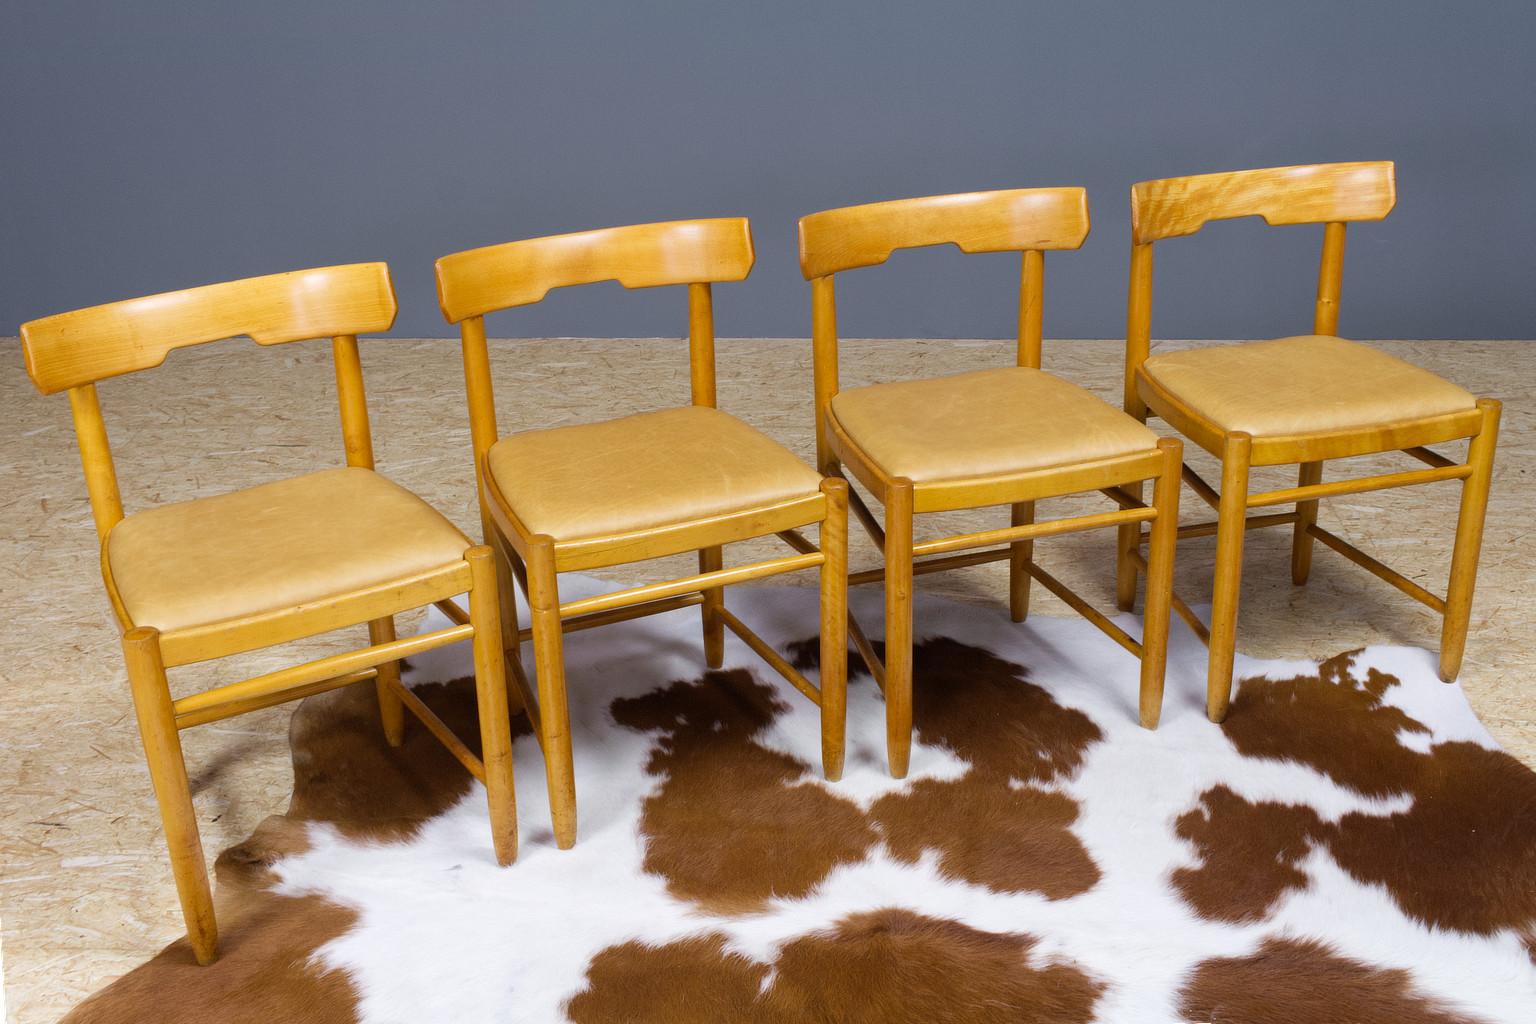 Mid-20th Century Scandinavian Modern Dining Chairs in Beech and Tan Leather, 1960s Set of 4 For Sale